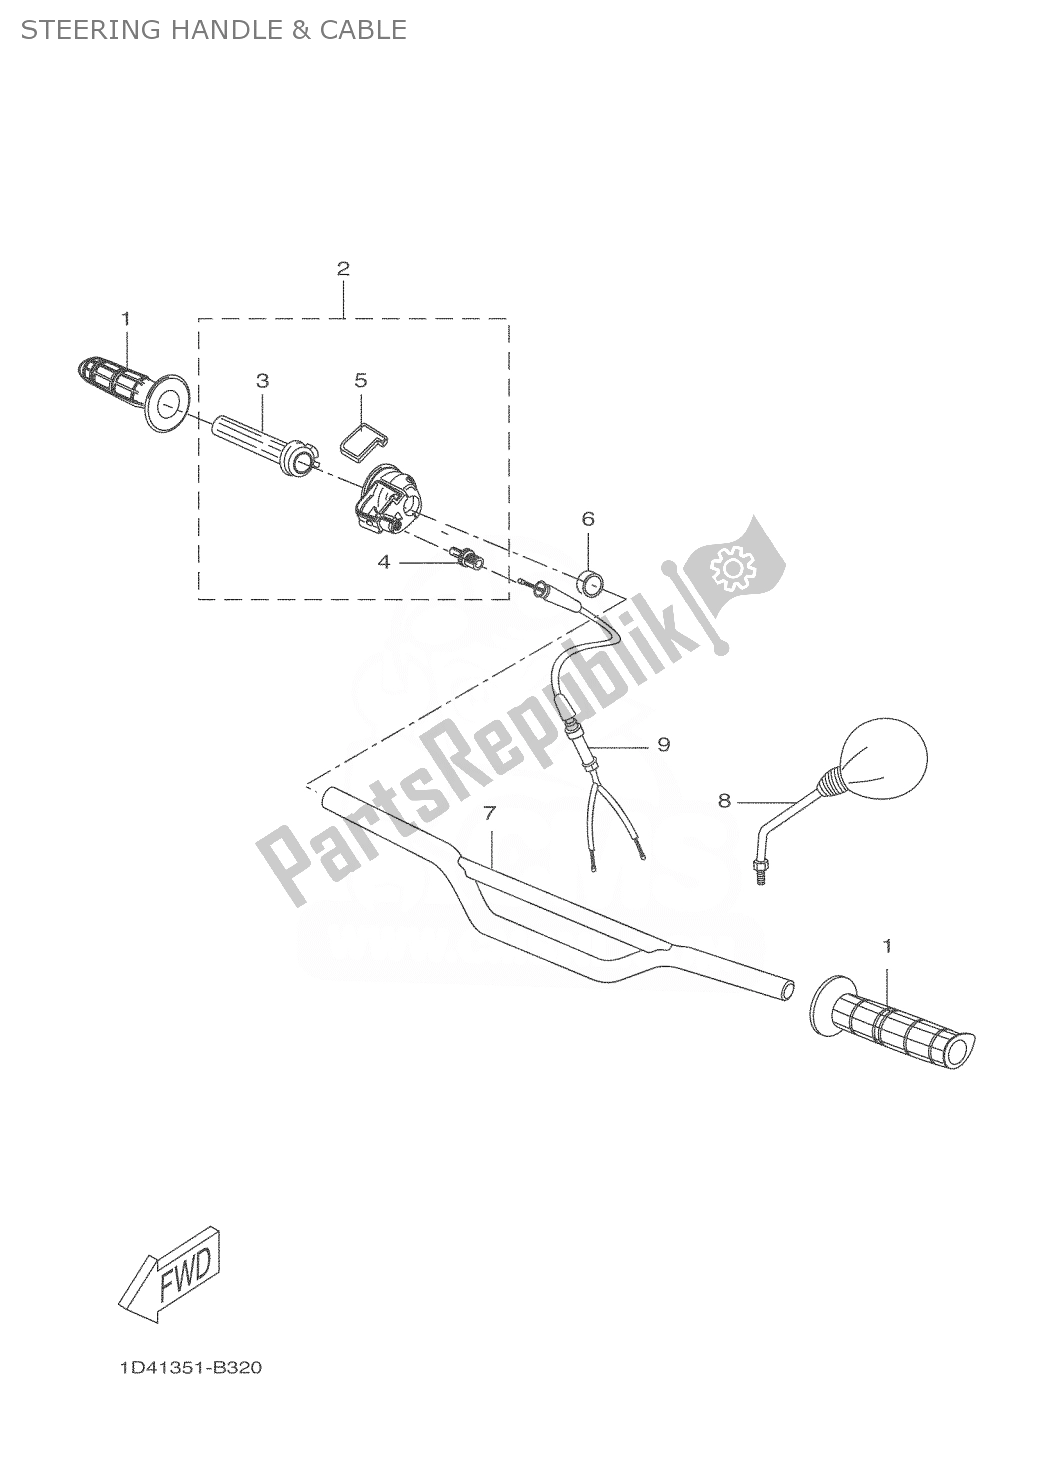 All parts for the Steering Handle & Cable of the Yamaha DT 50 2004